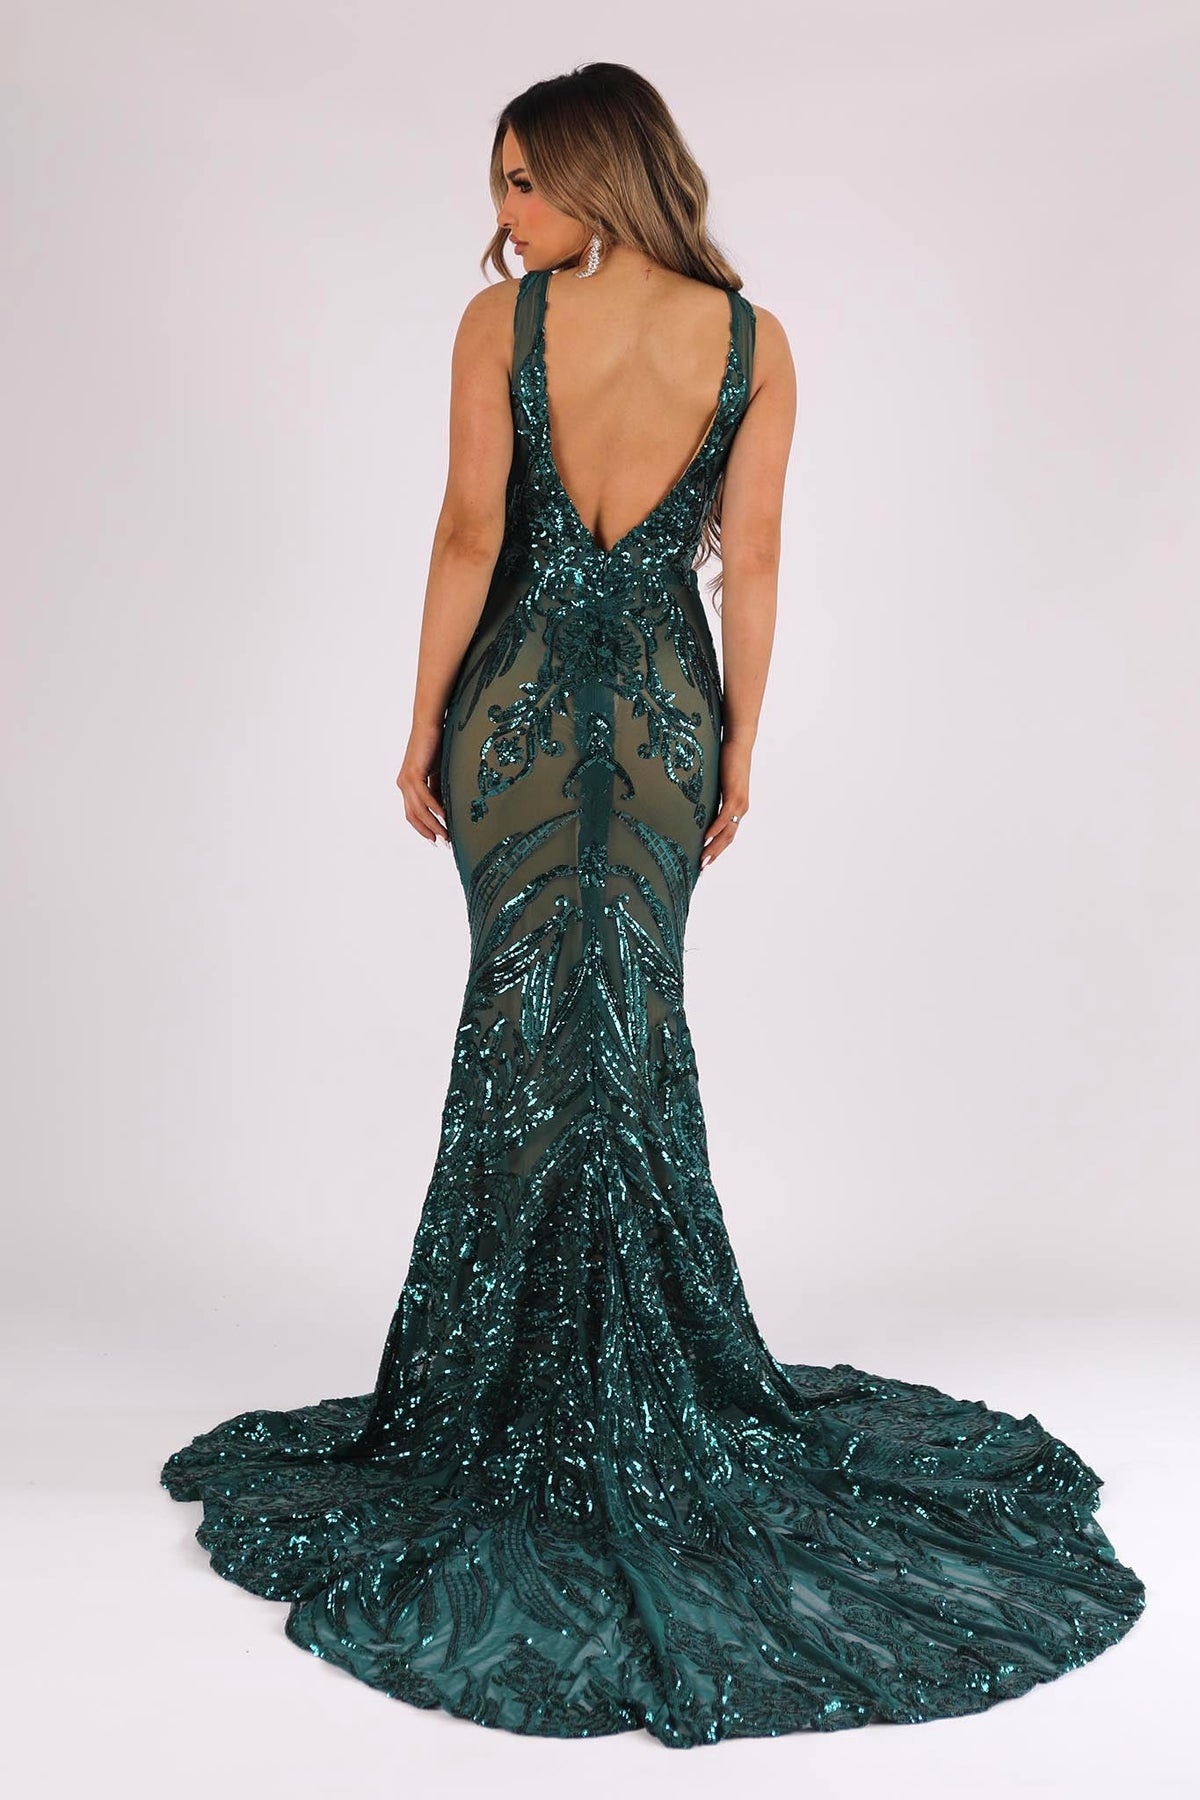 V Shape Open Back Design of Emerald Green Majestic Pattern Sequin Fit and Flare Evening Gown with V Neck and Floor Sweeping Train